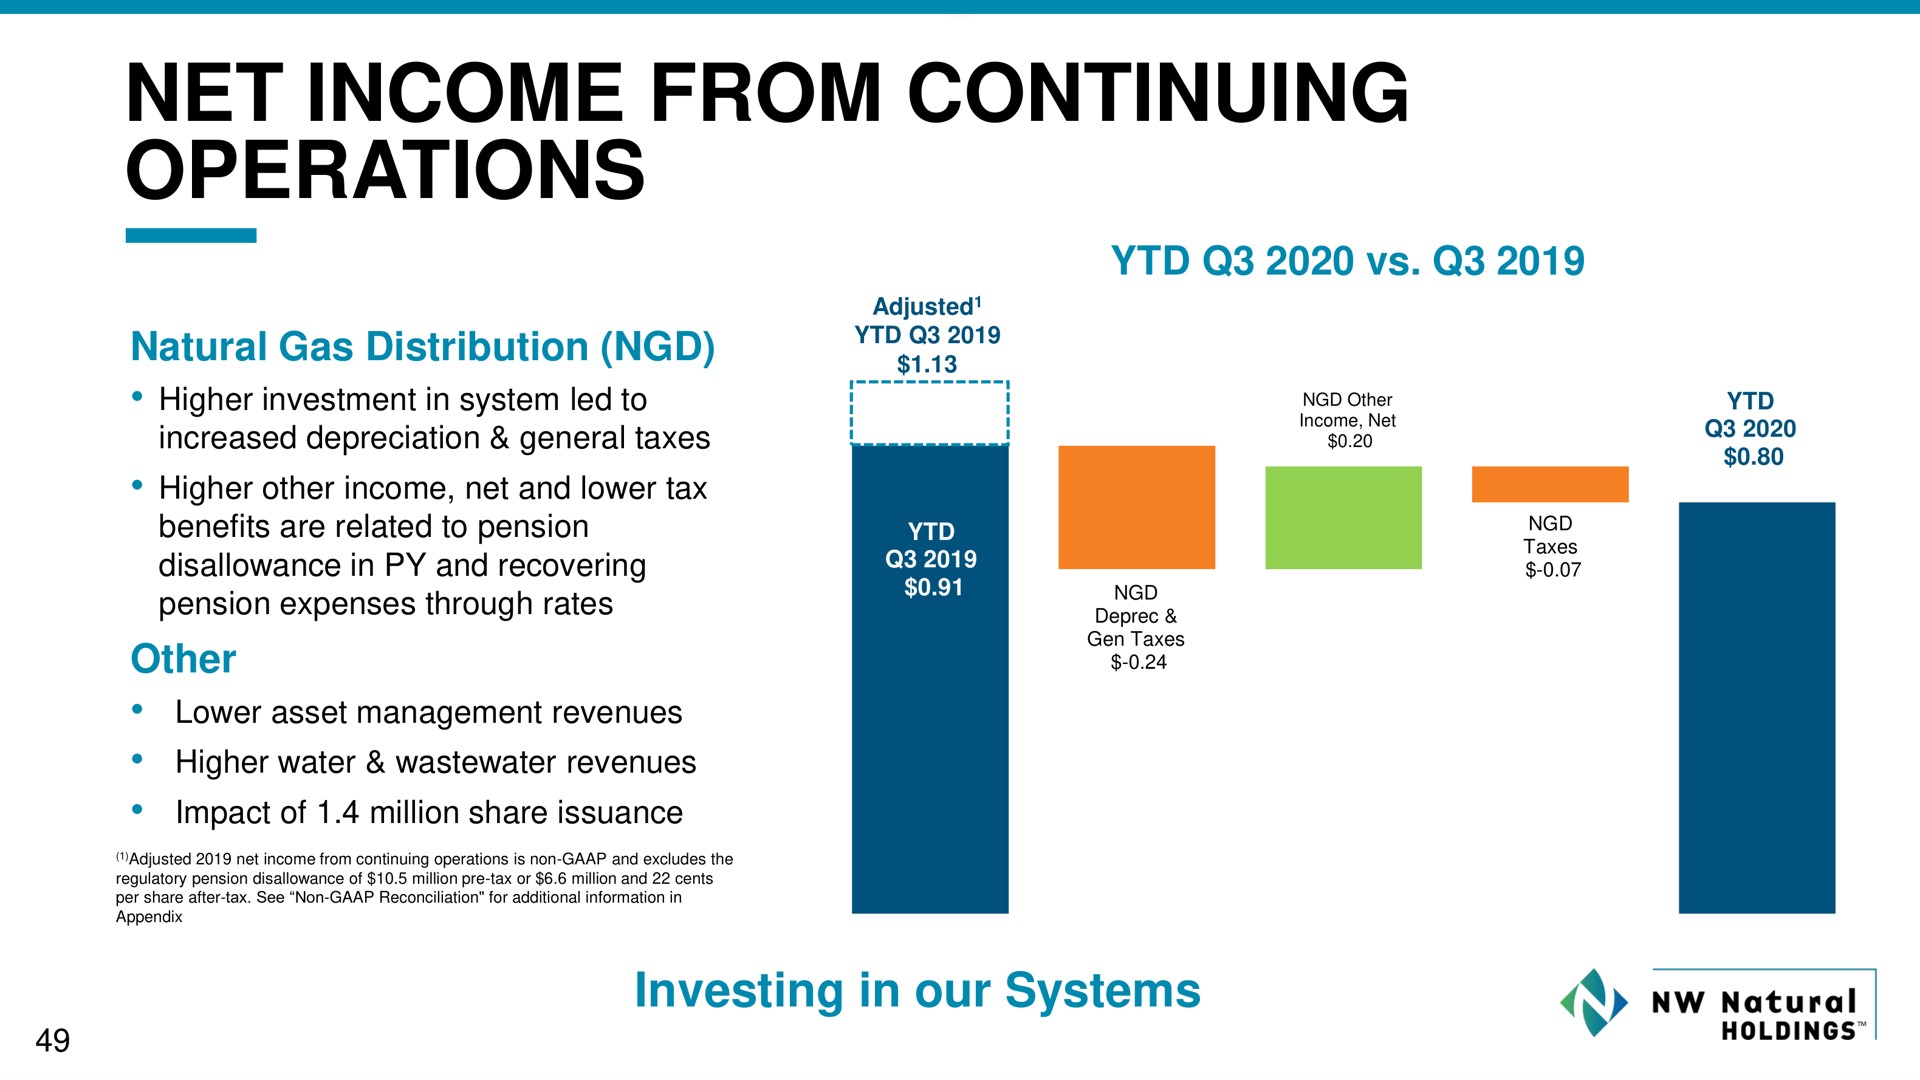 net income from continuing operations | NW Natural Holdings